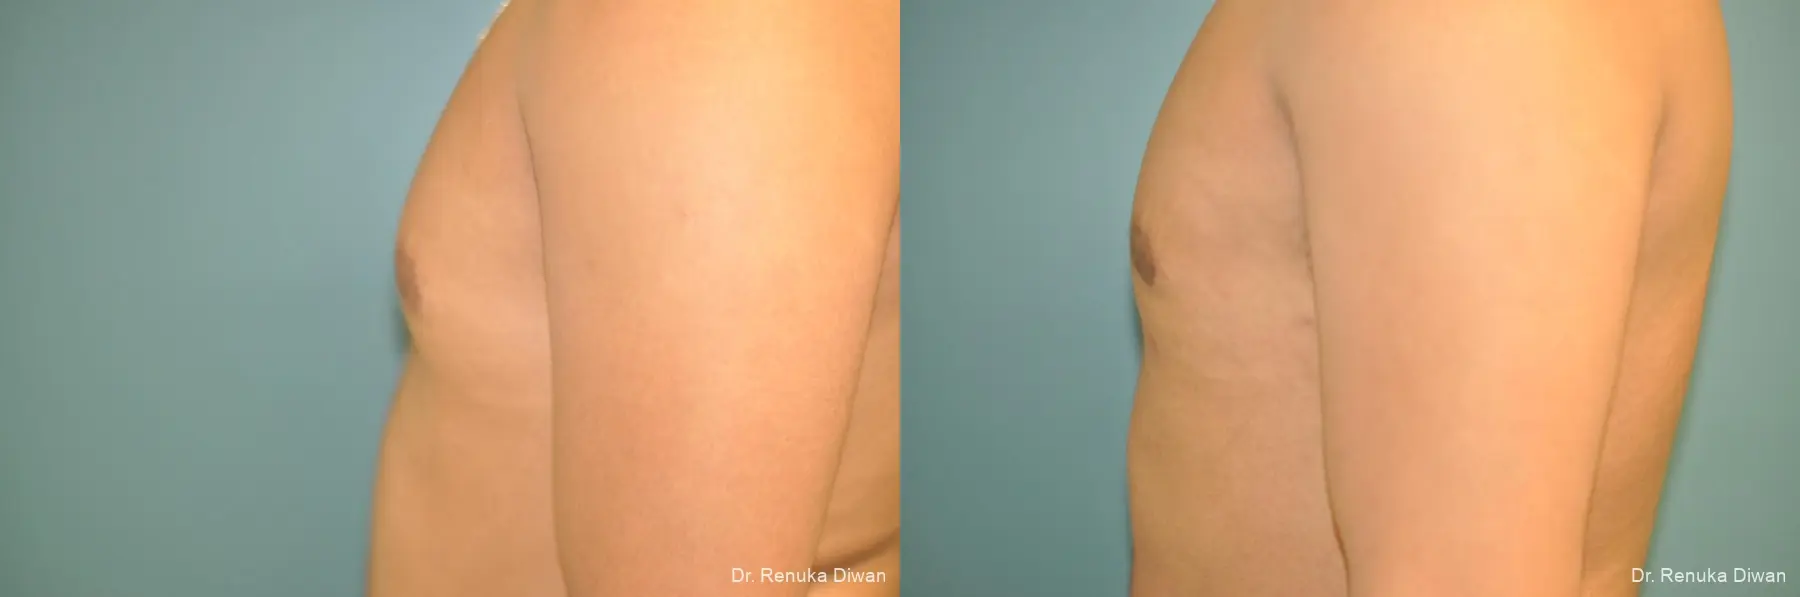 Liposuction-for-men: Patient 2 - Before and After  